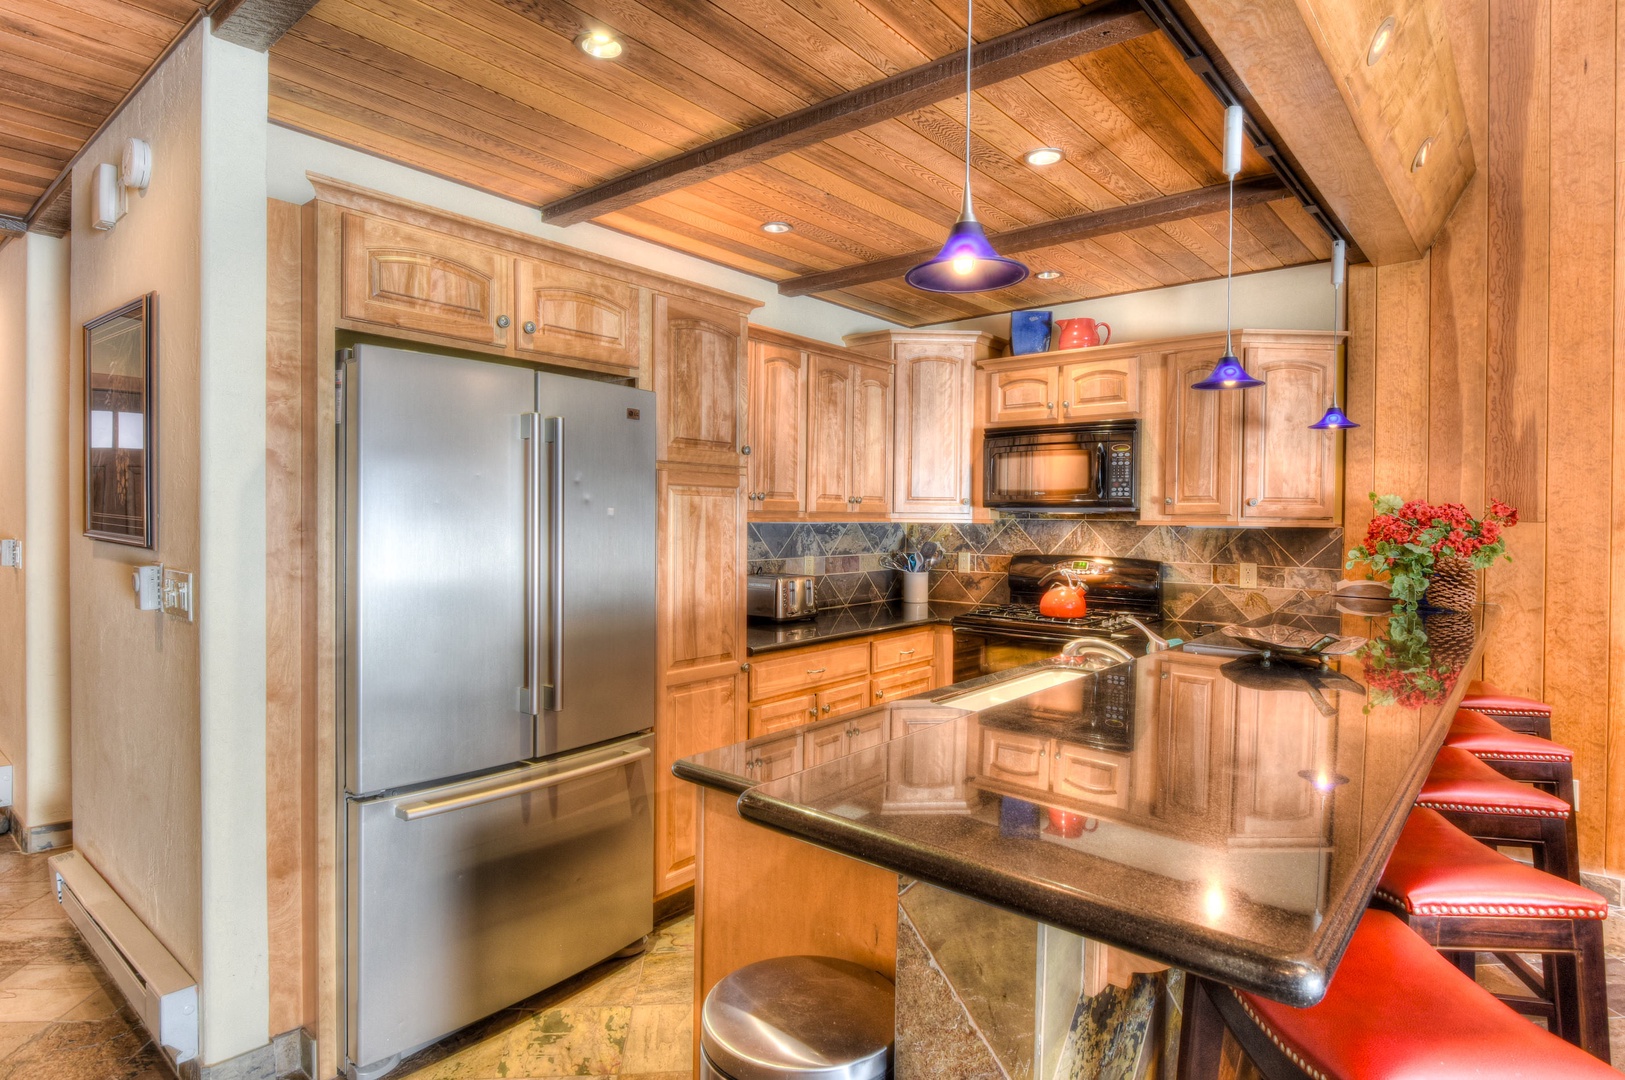 Fully equipped kitchen stainless steel appliances